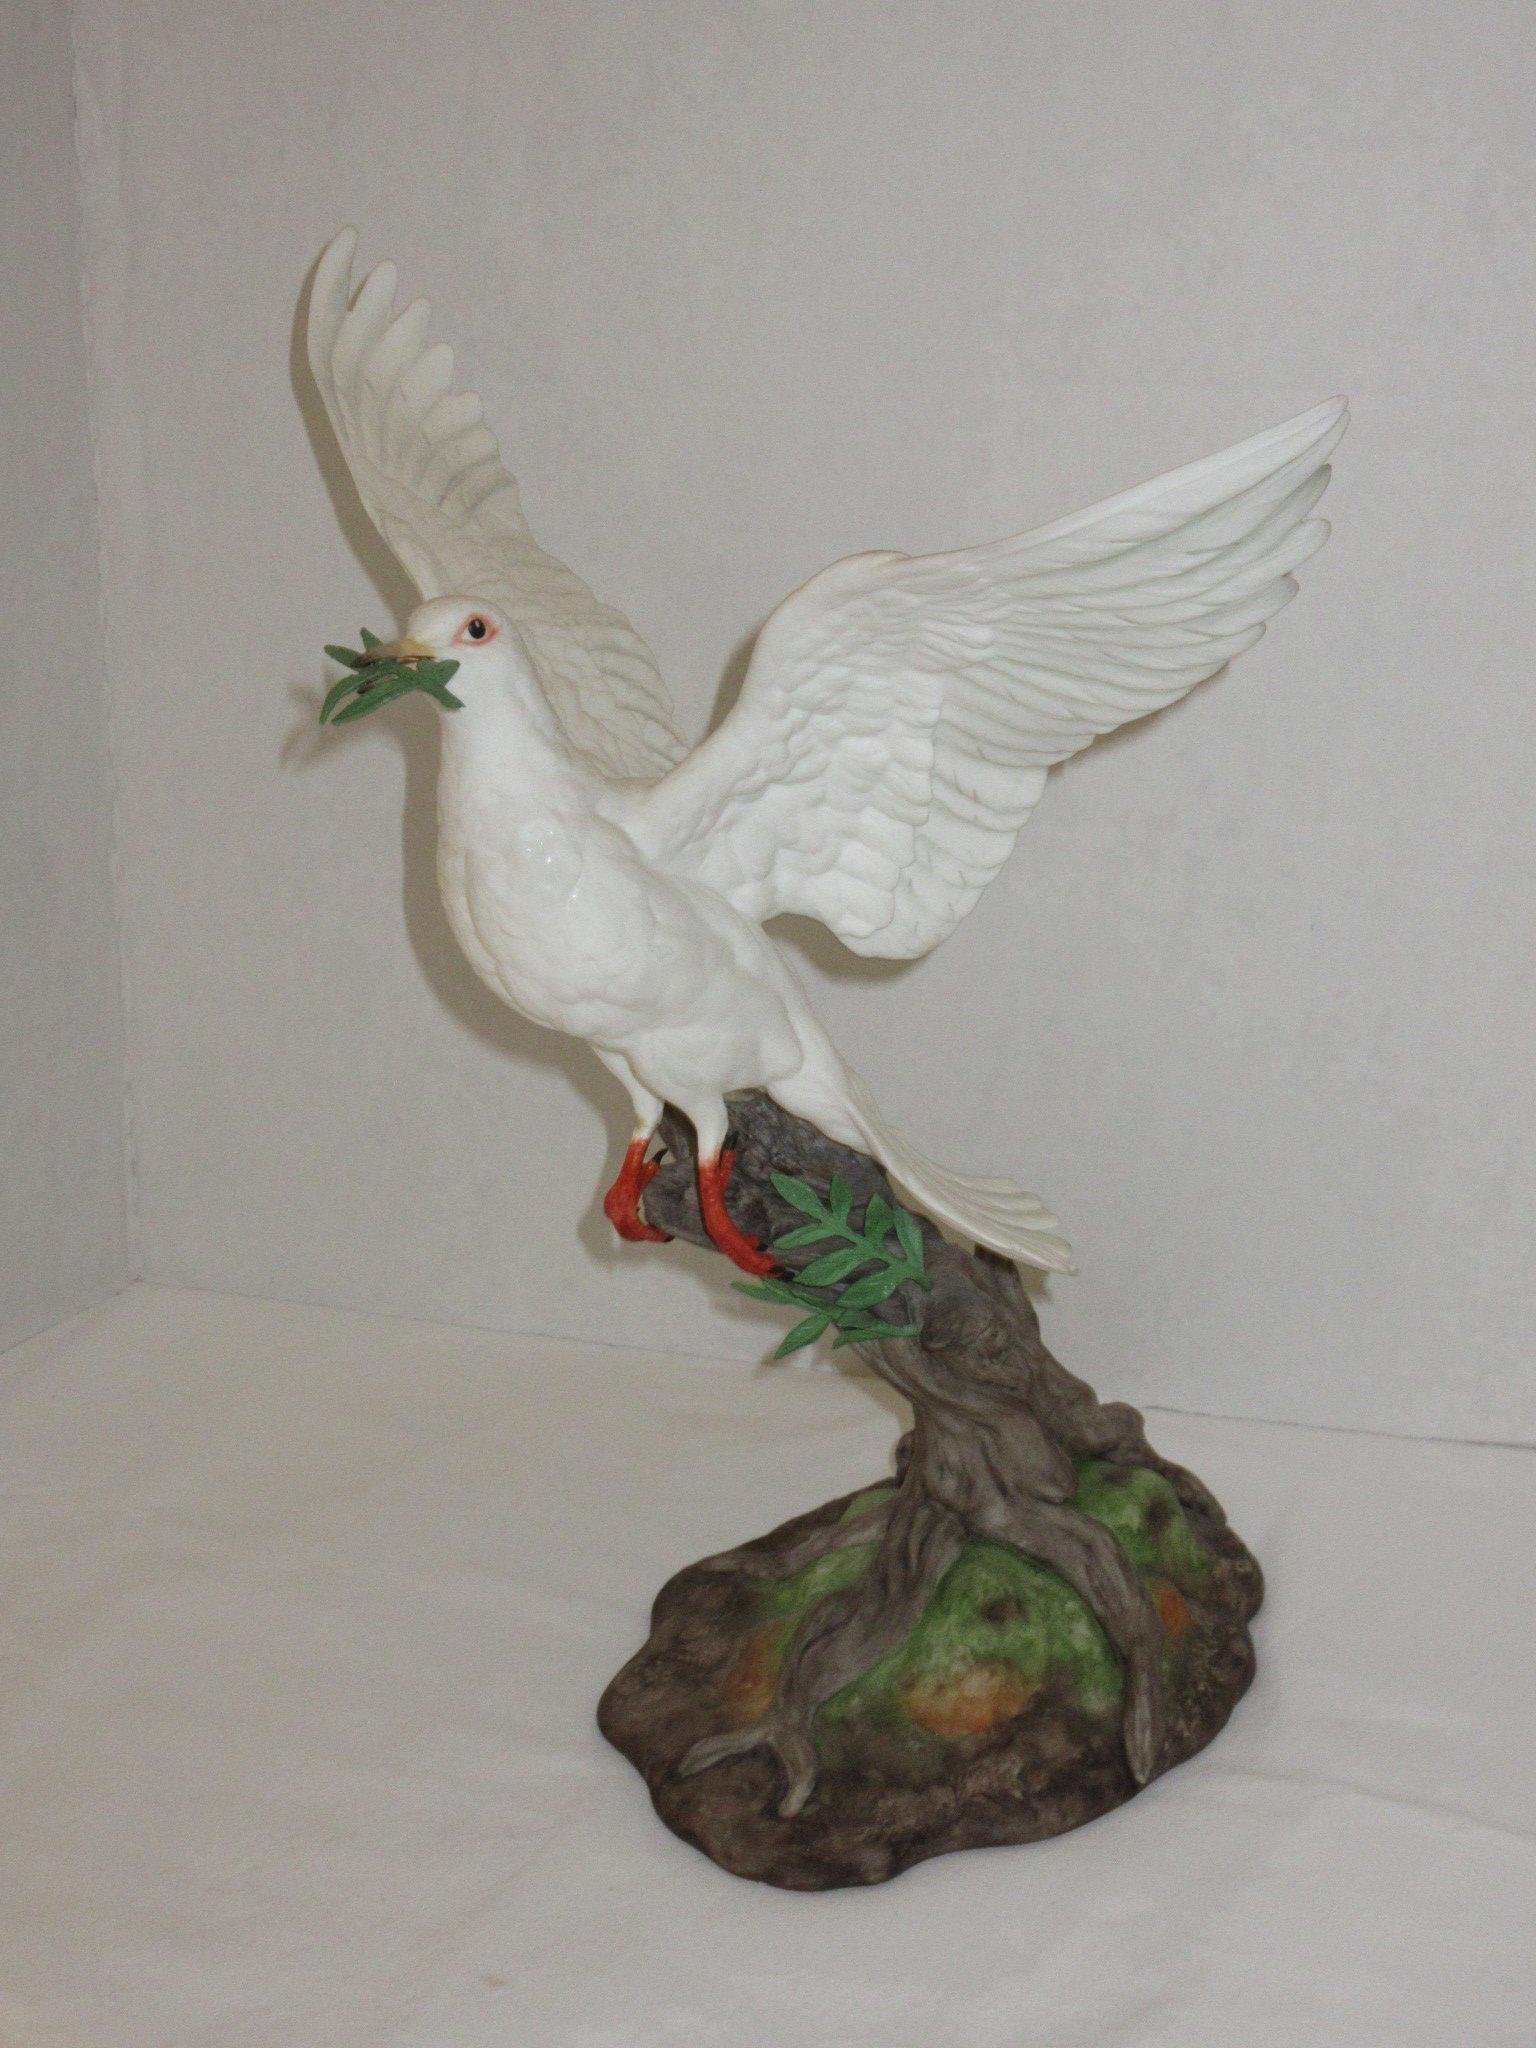 Ltd Edition, Signed Porcelain Dove of Peace Figurine by Boehm. Style # 40236 - Issue # 591